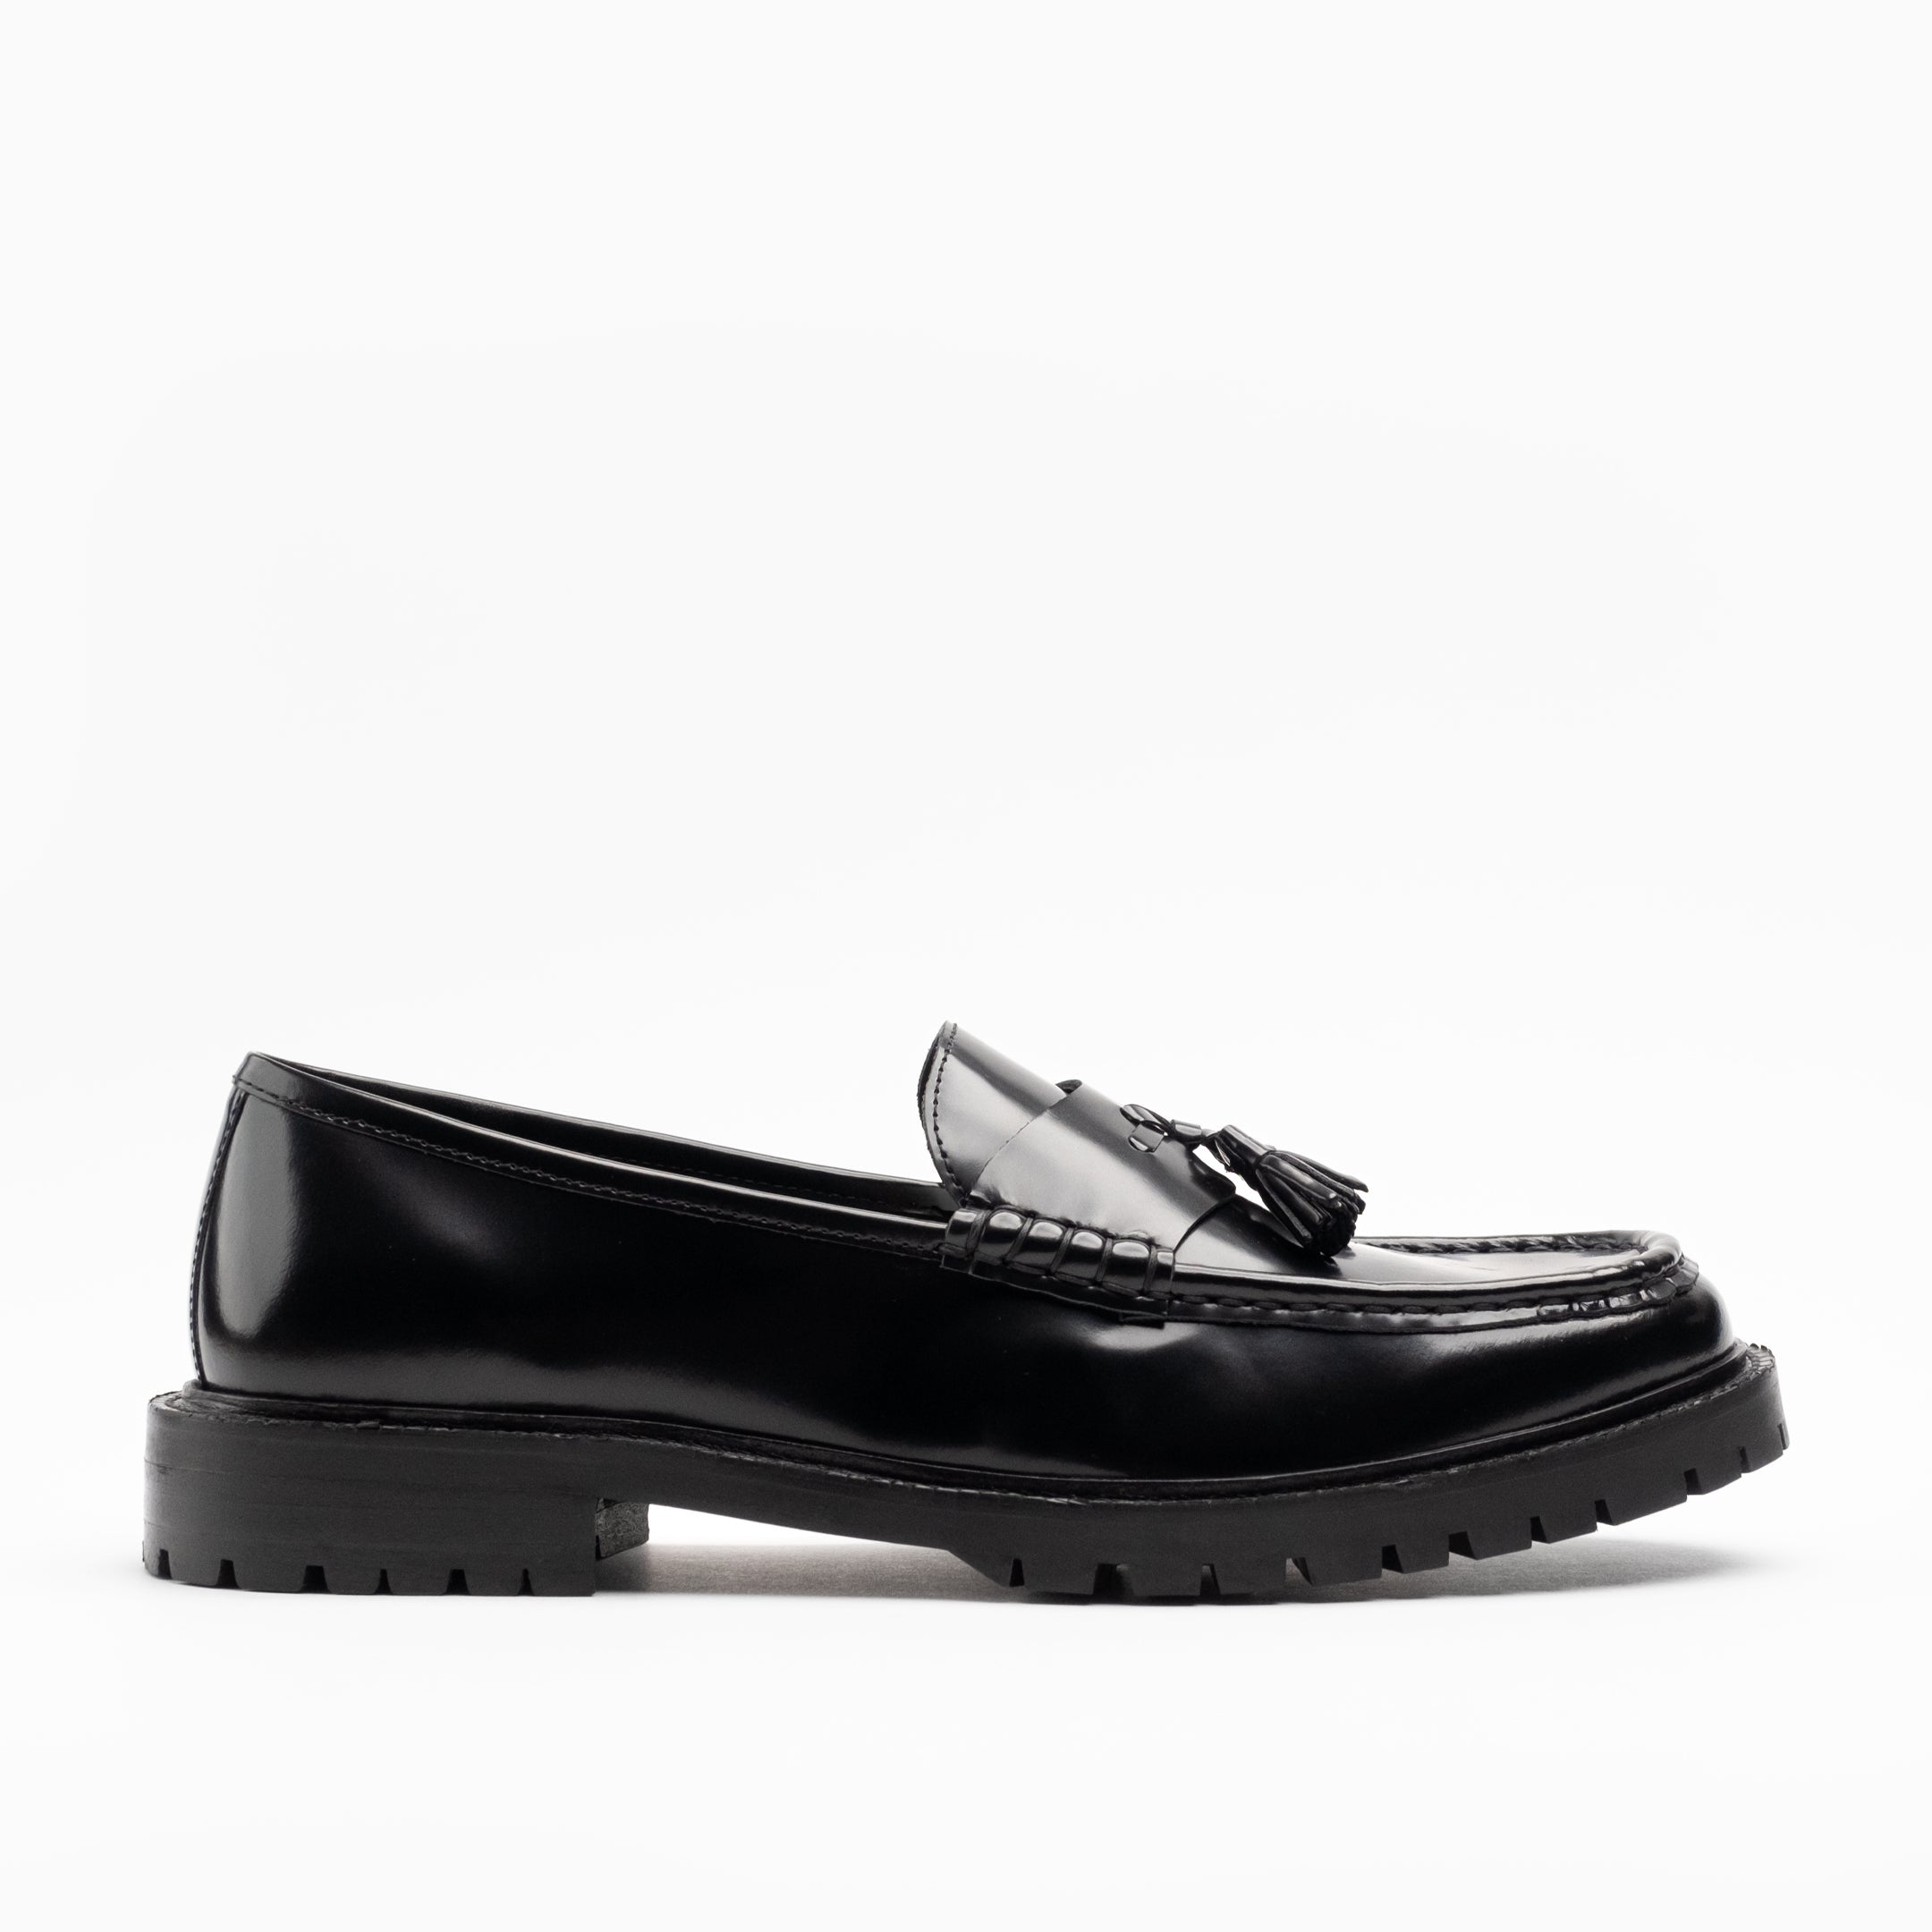 Walk London Mens Campus Tassel Loafer in Smooth Black Leather